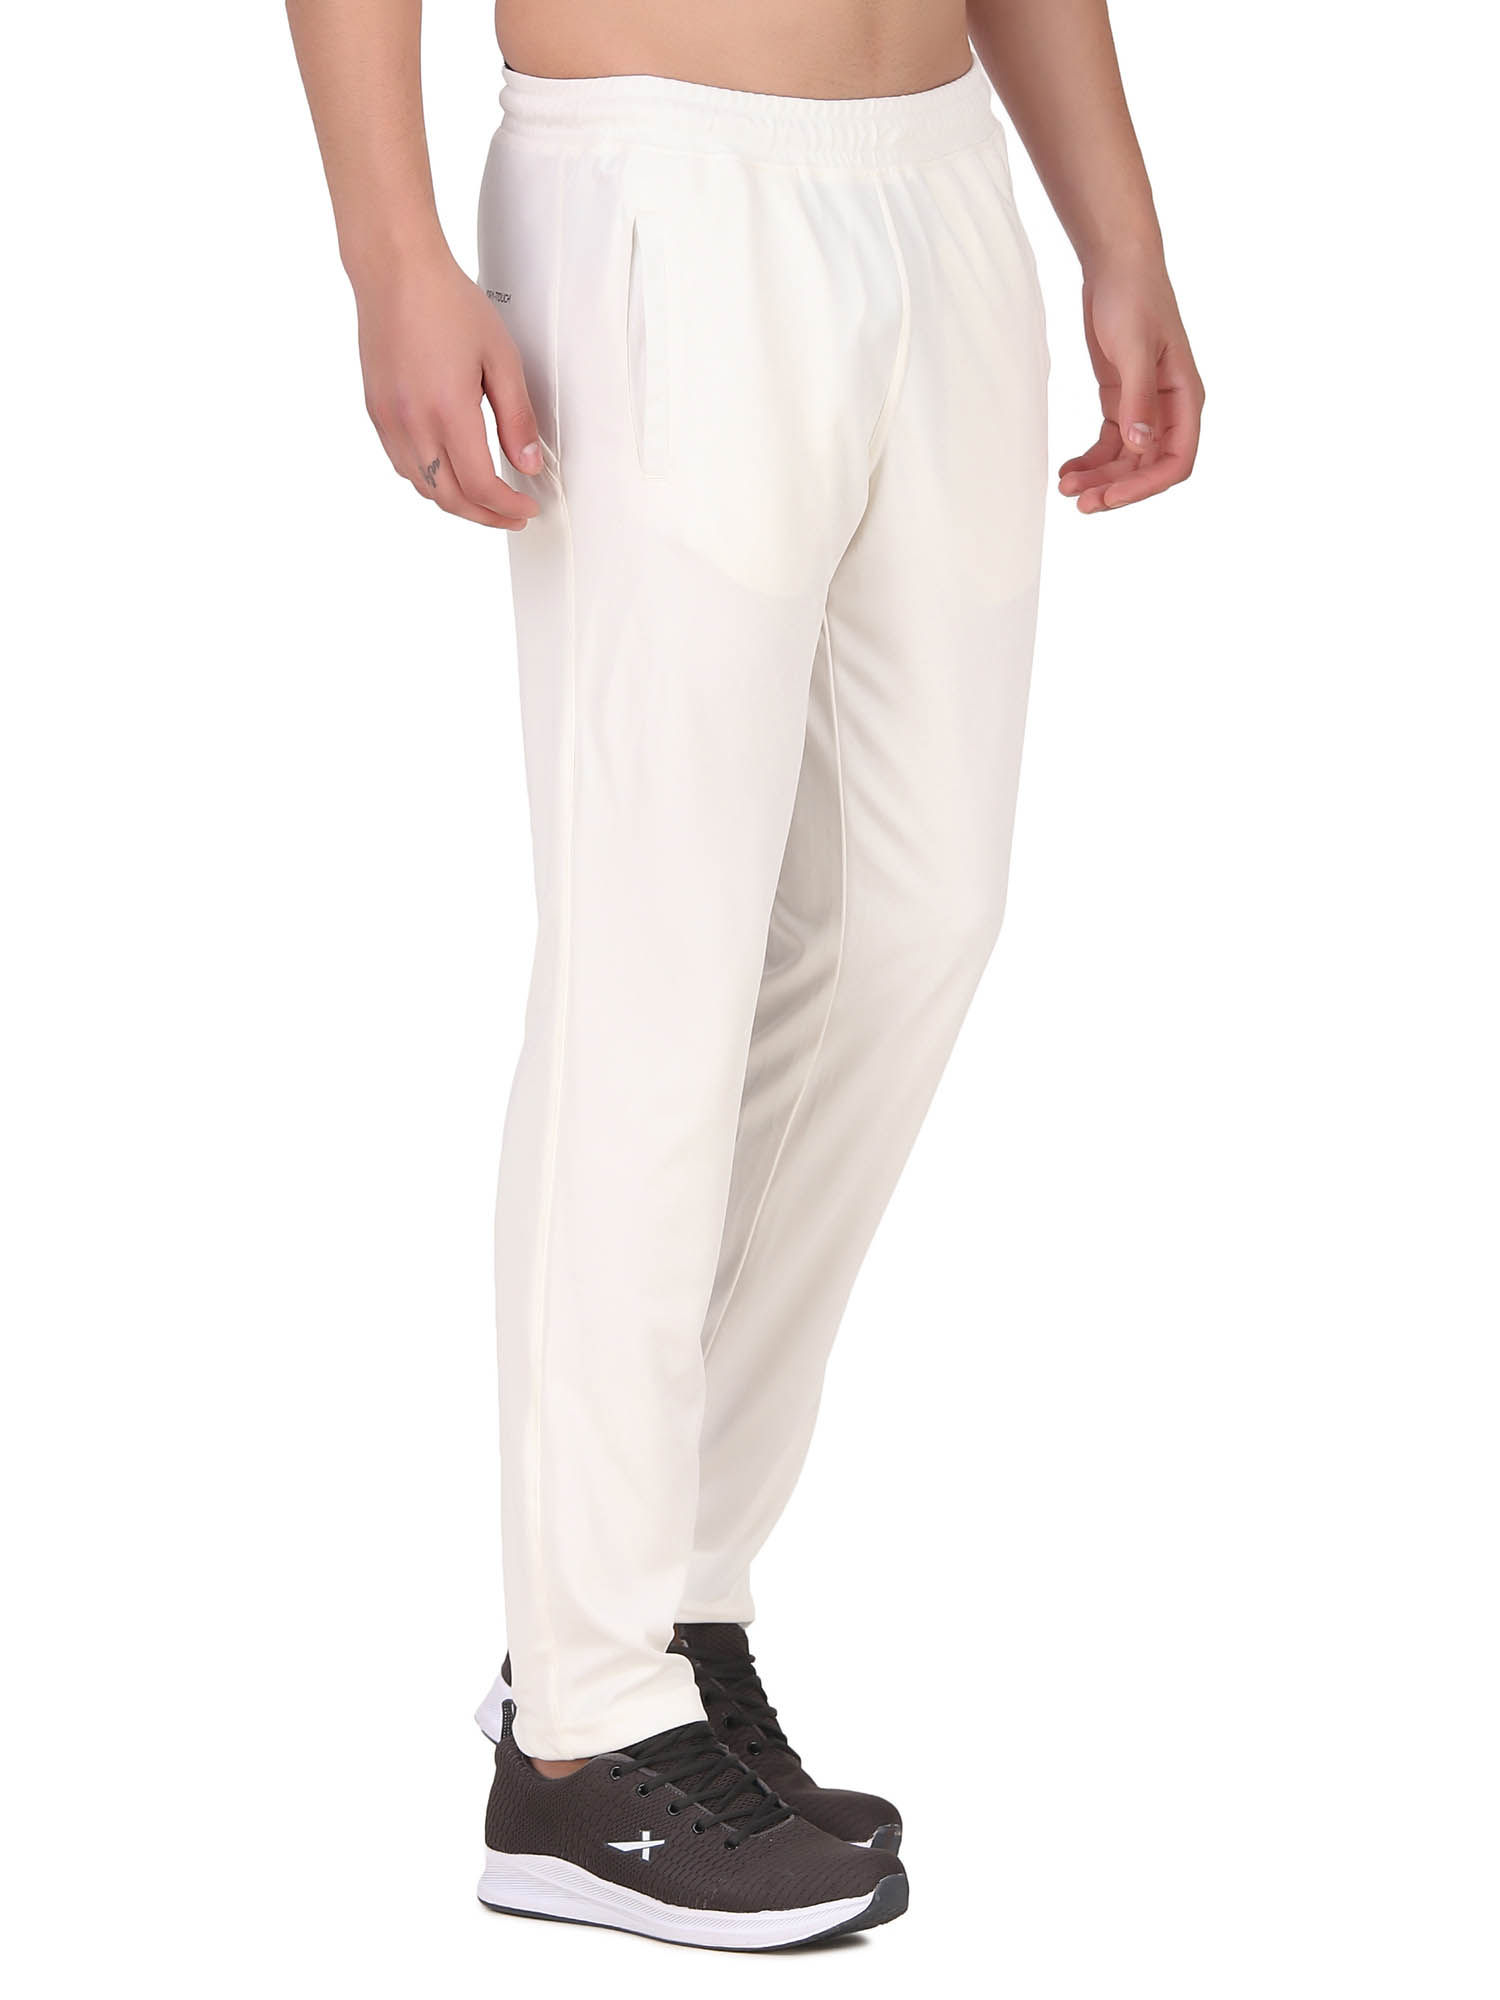 SG Premium 2.0 Cricket Trousers – Sports Wing | Shop on